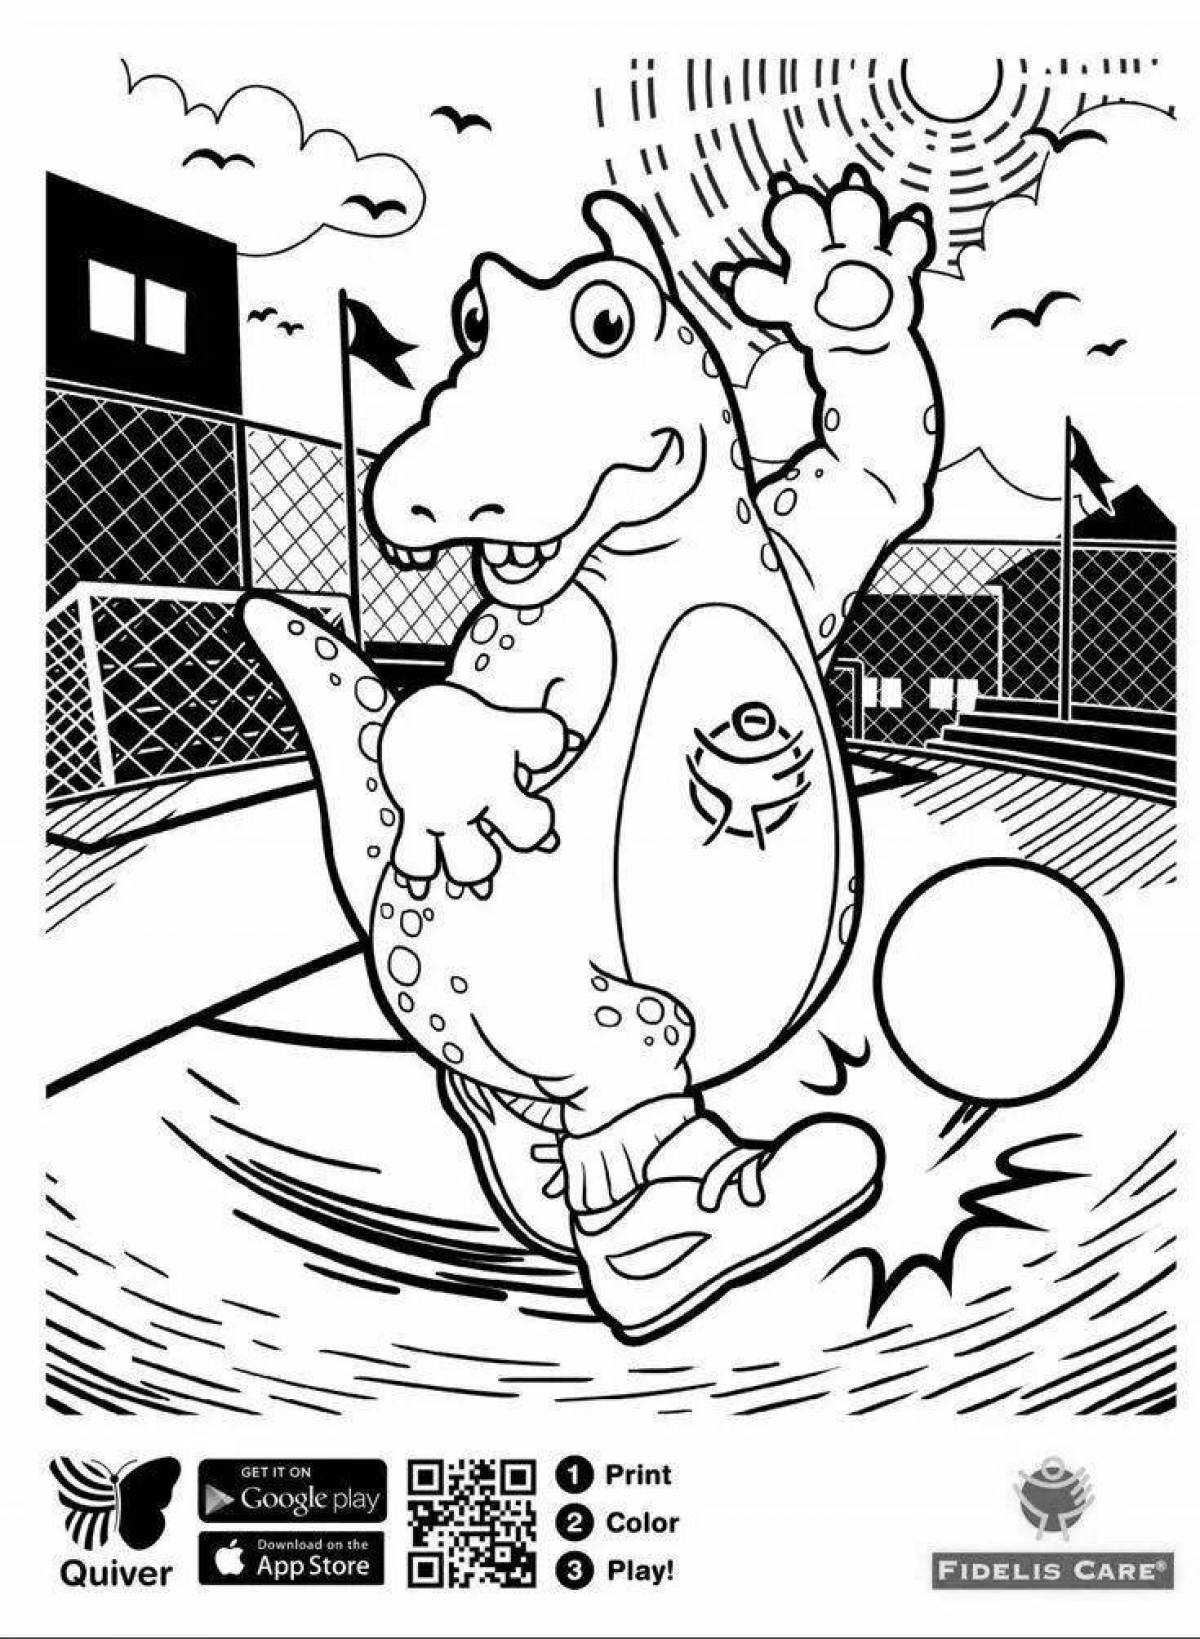 Colourful quiver coloring page